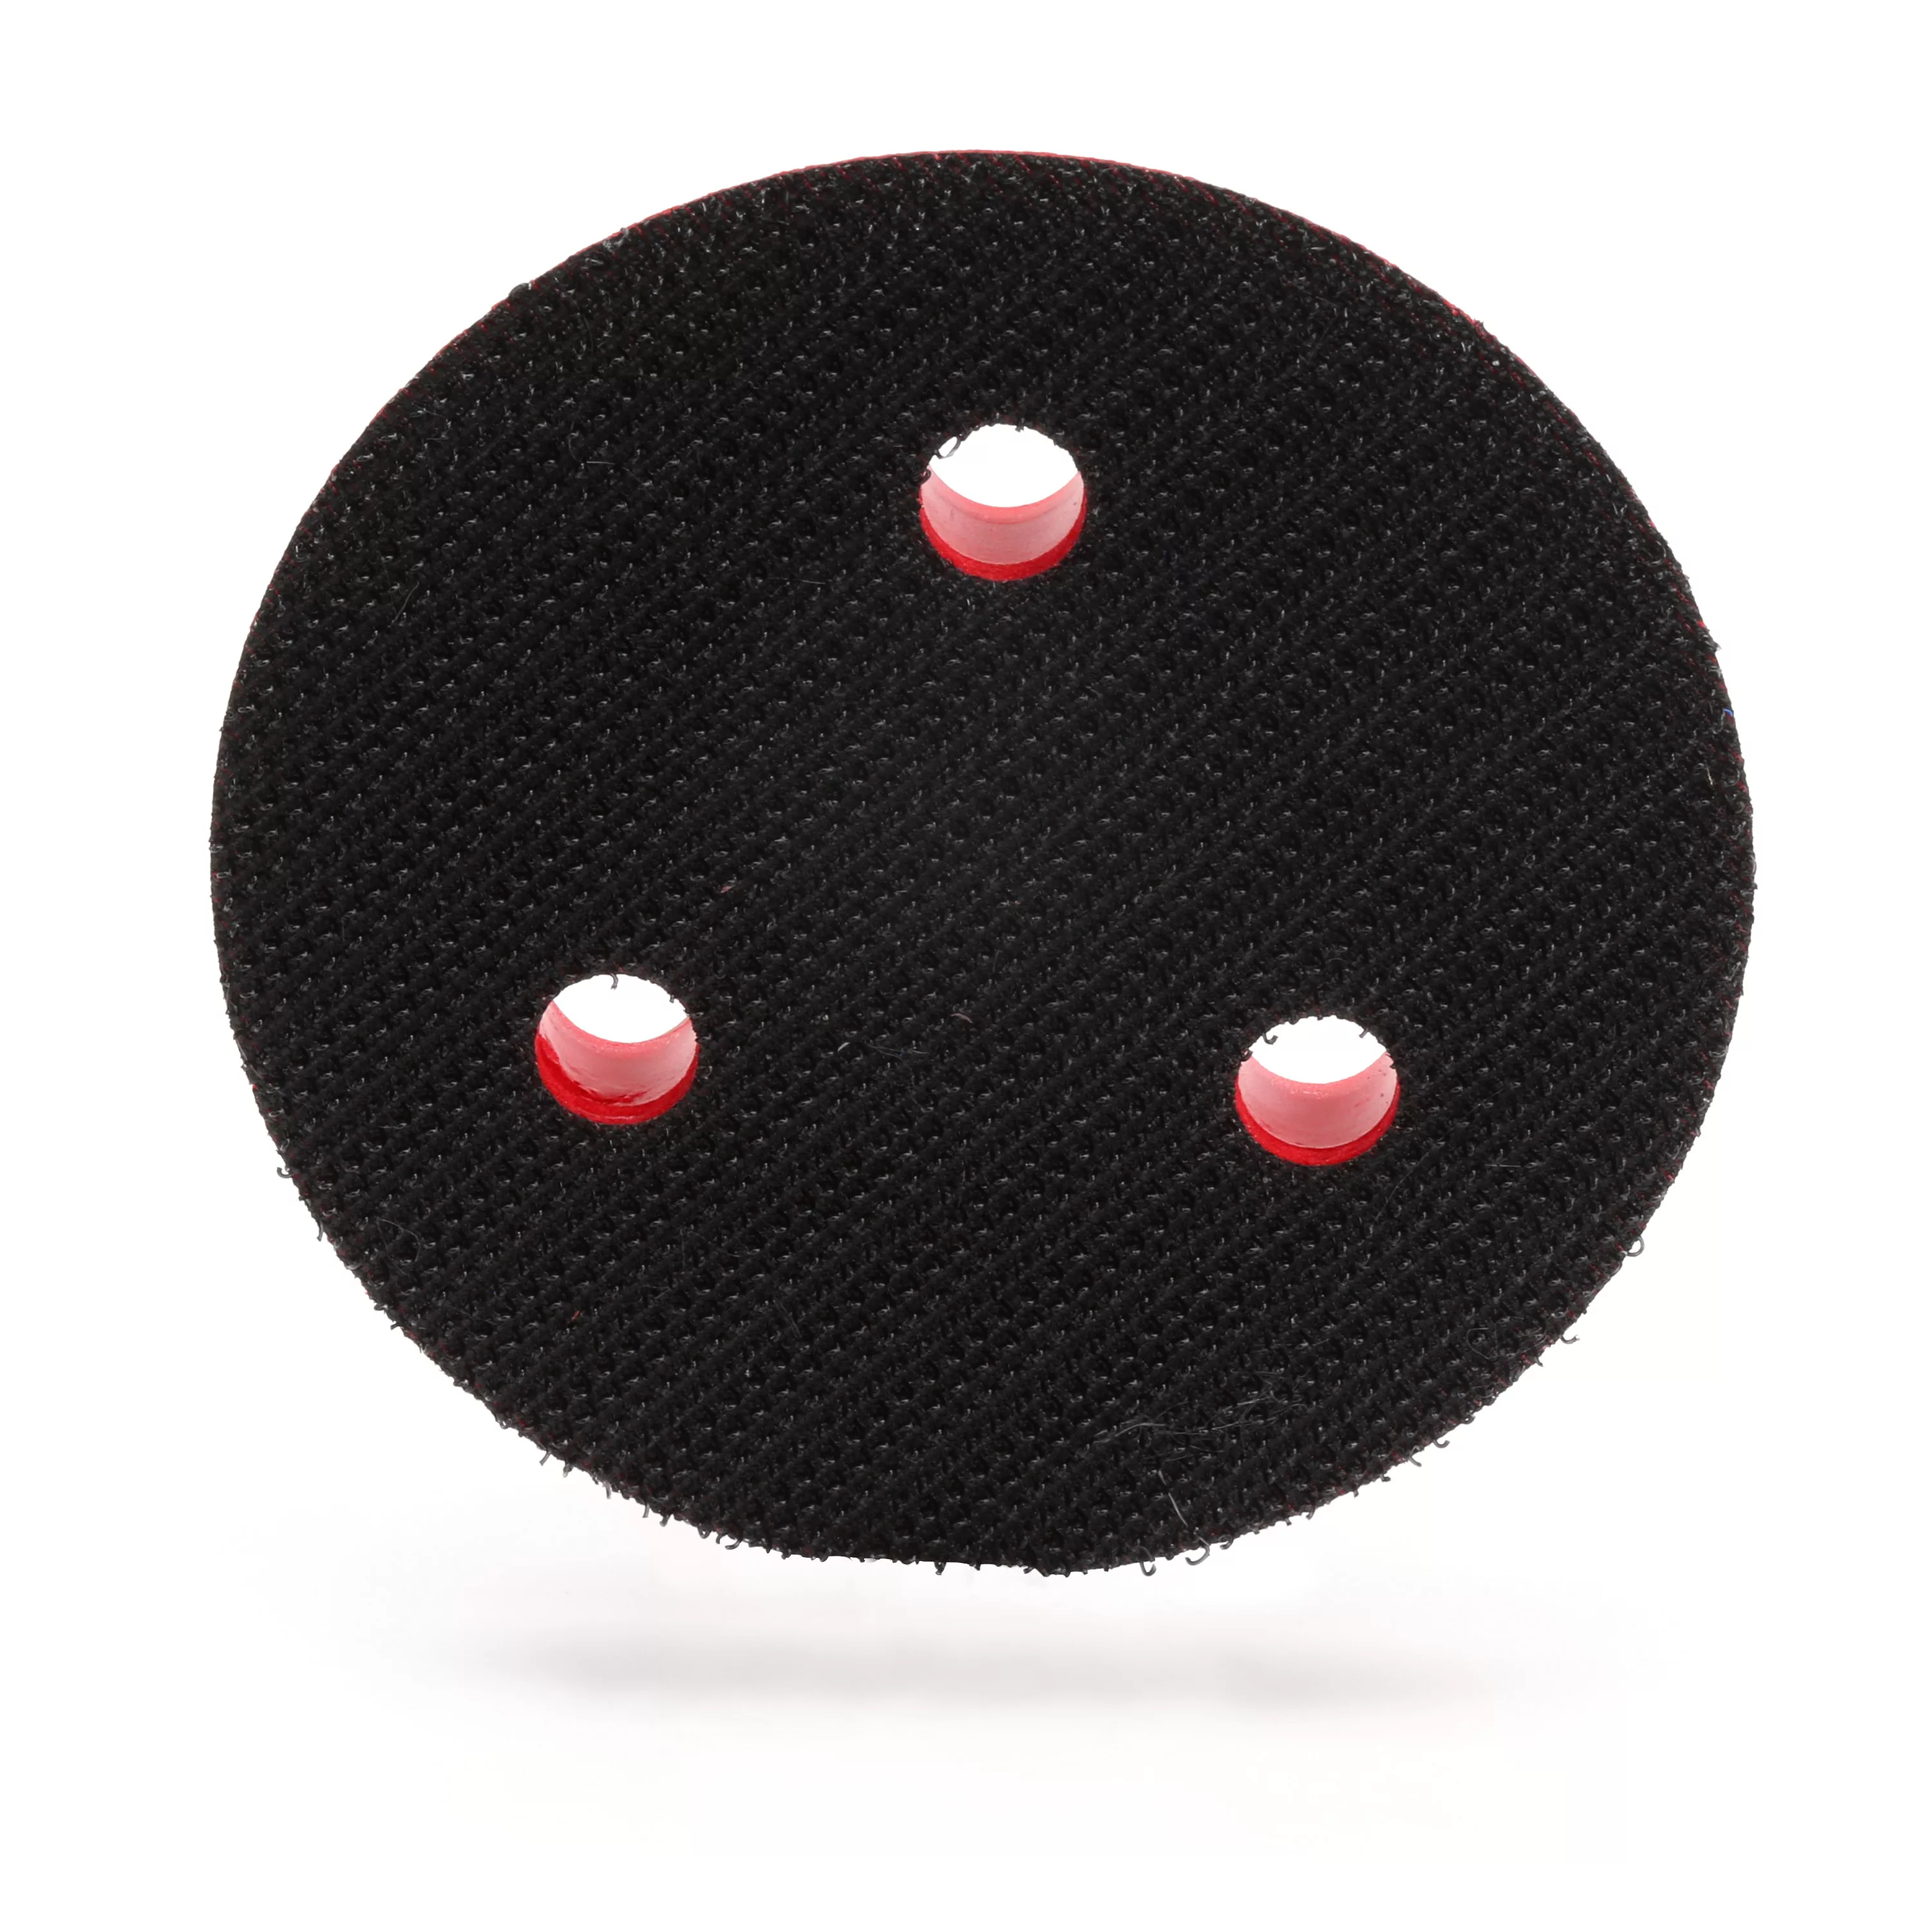 3M Xtract™ Low Profile Back-up Pad, 20350, 3 in x 1/2 in x 1/4 in-20 External, 3 Holes, Red Foam, 10 ea/Case